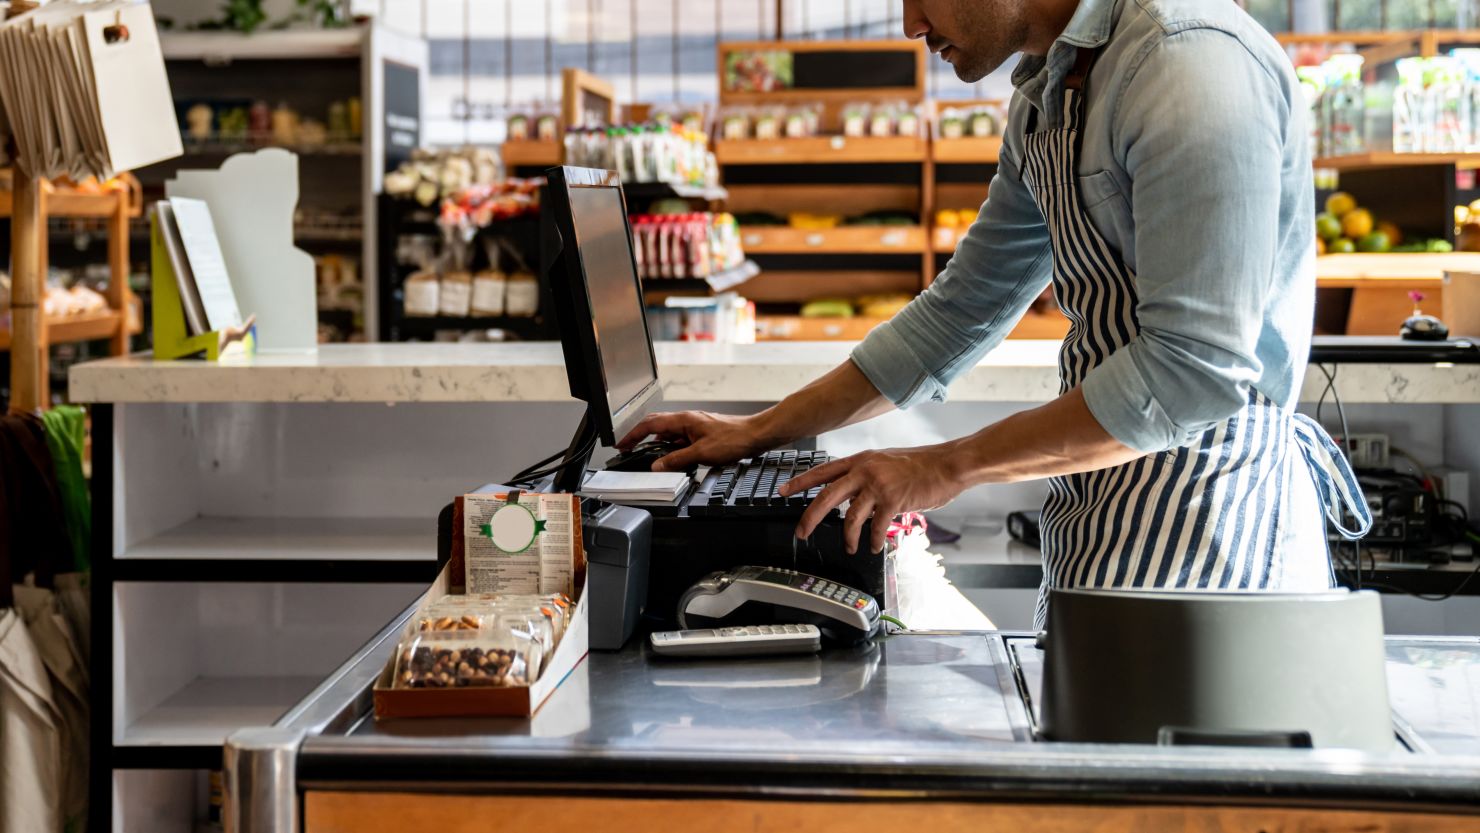 Cashiers may not make a lot of money. But the skills they acquire on the job may be transferable to higher paying occupations that don't typically require a college degree.